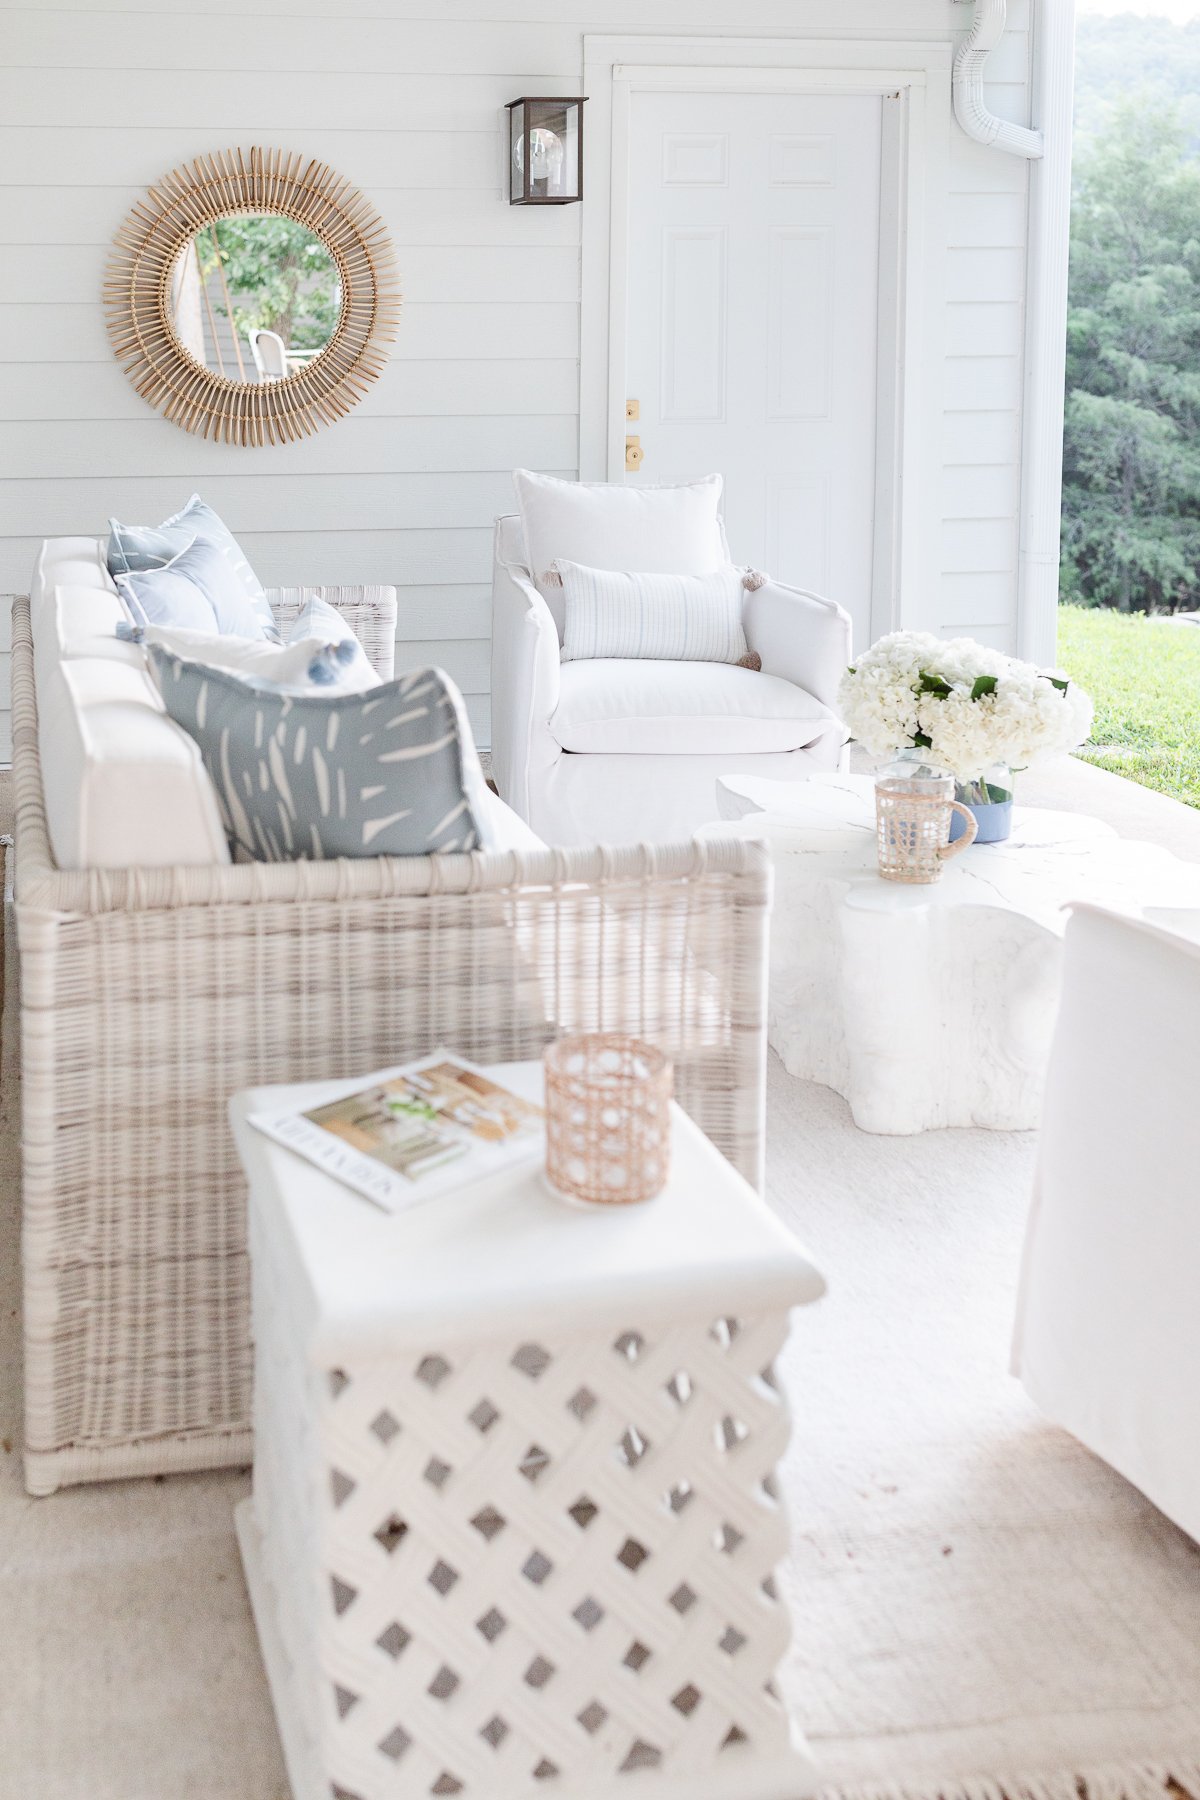 A white living room furnished with wicker furniture and ceramic garden stools.